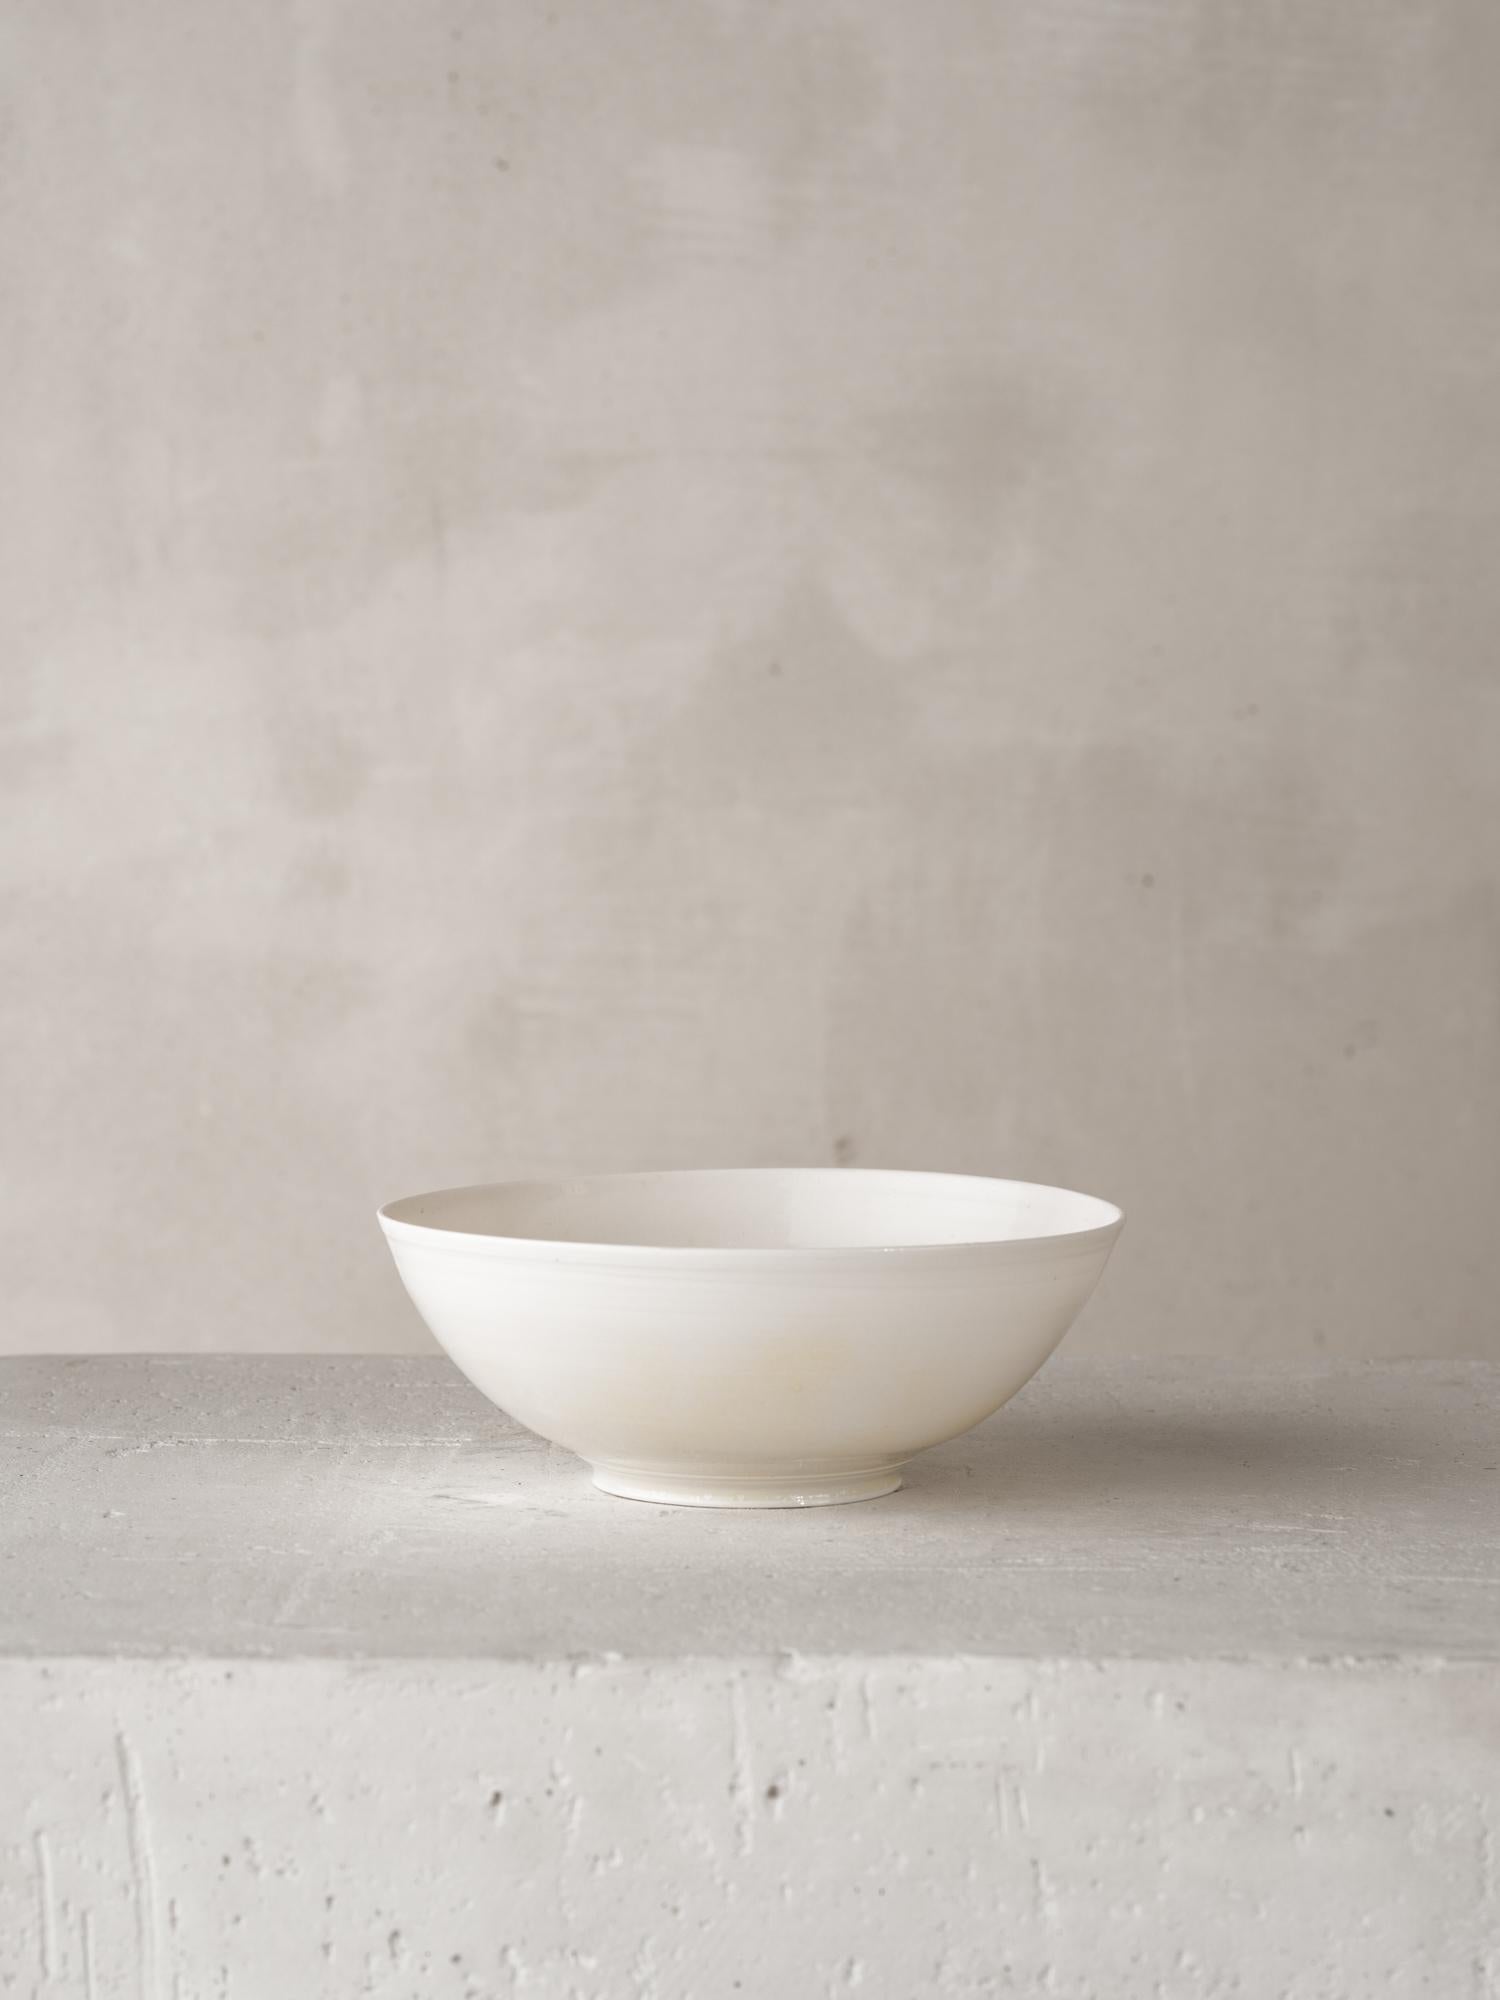 Materials: Wheel Thrown Porcelain
Unique Work  Signed by the Artist

For over forty years Katherine Glenday has been creating meditative ceramic and porcelain pieces by hand in her South African studio. Remarkable in their translucency and